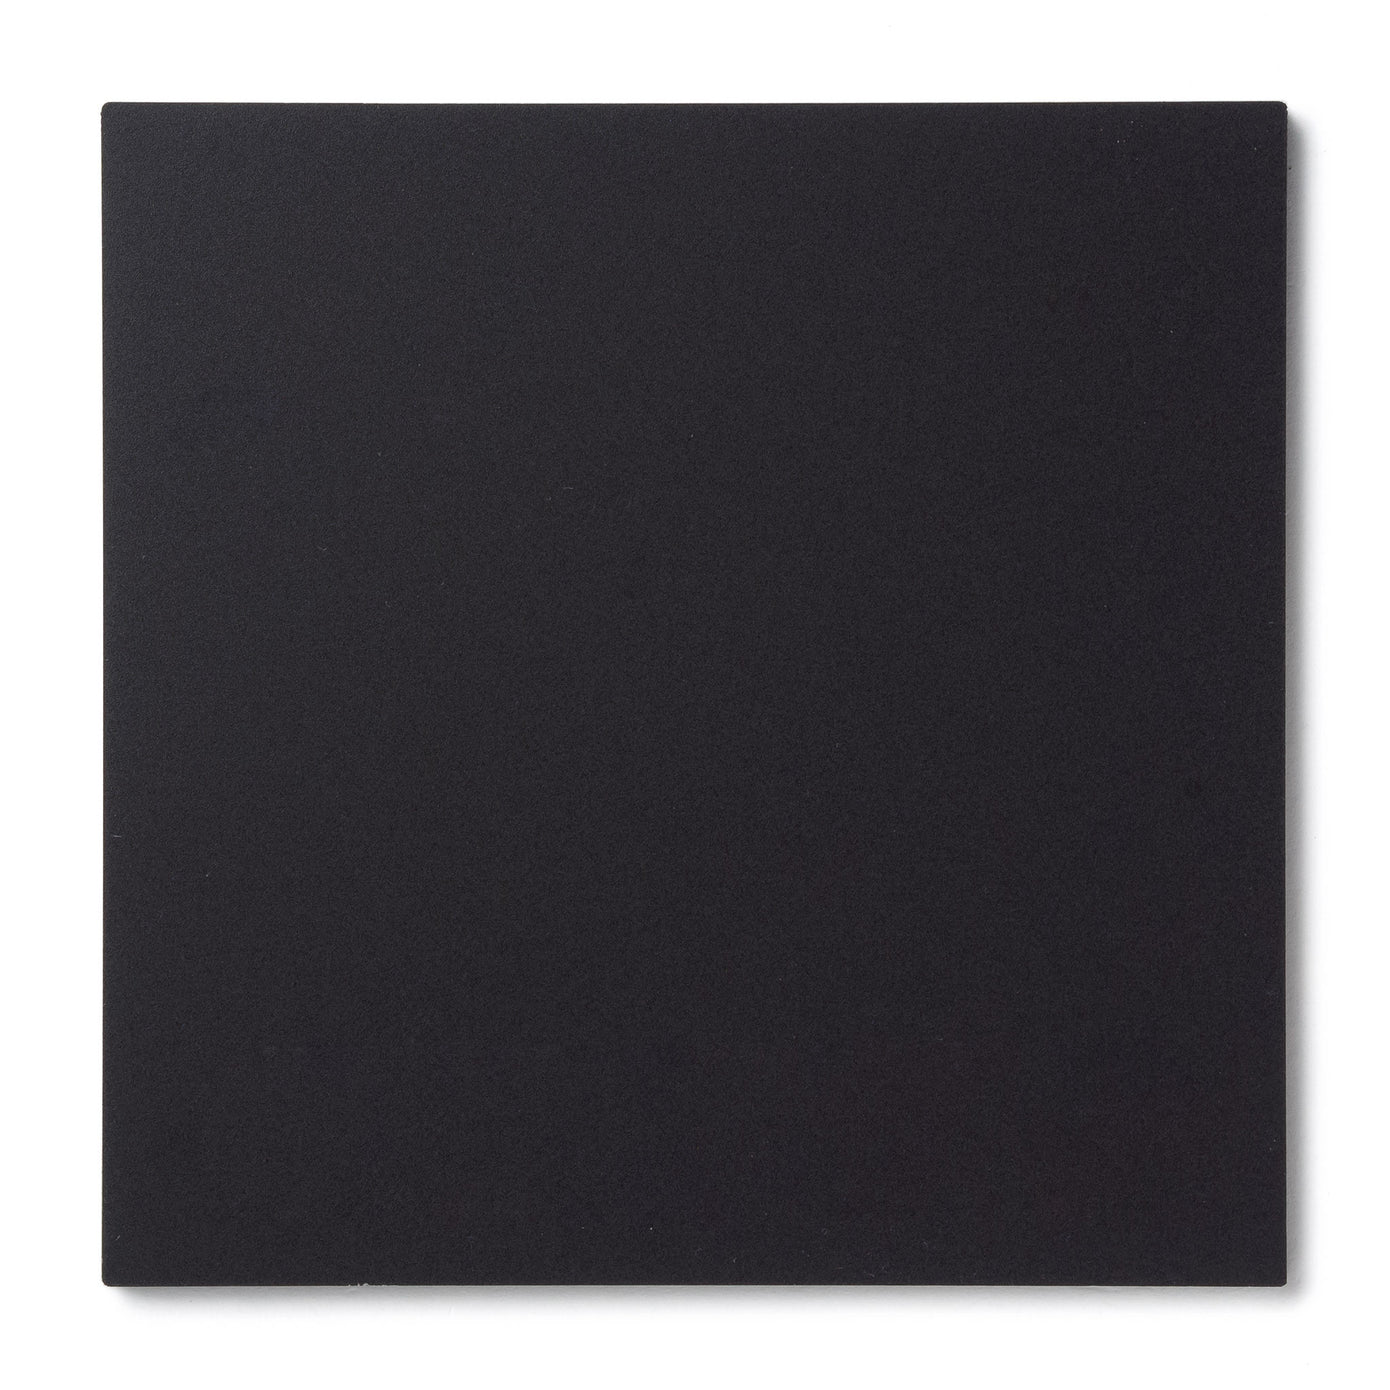 Black Acrylic Sheets, Cast 2025 Cut-to-Size